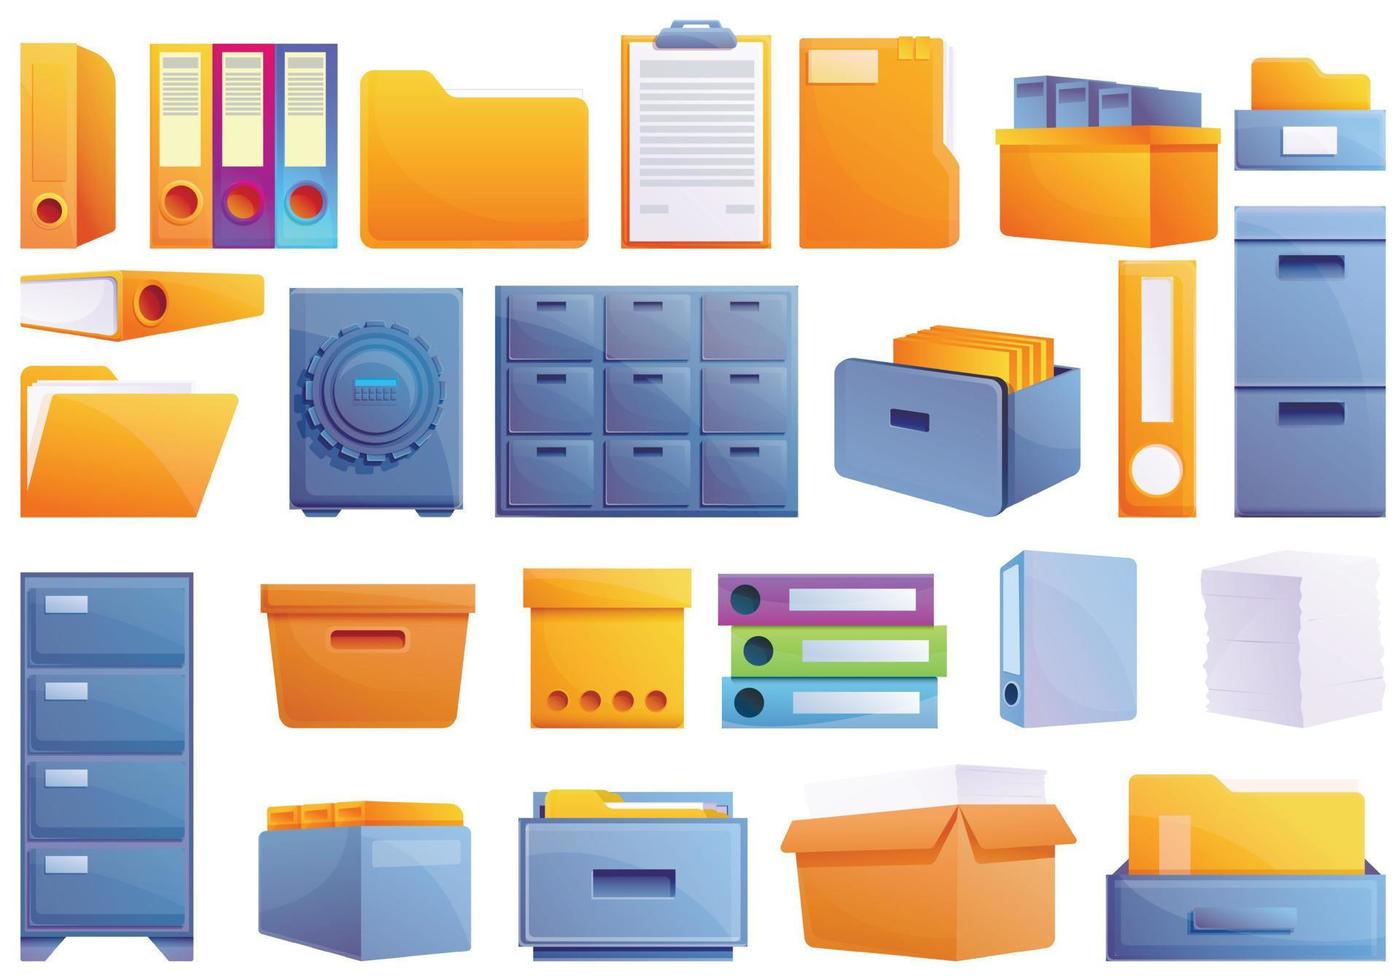 Storage of documents icons set, cartoon style vector